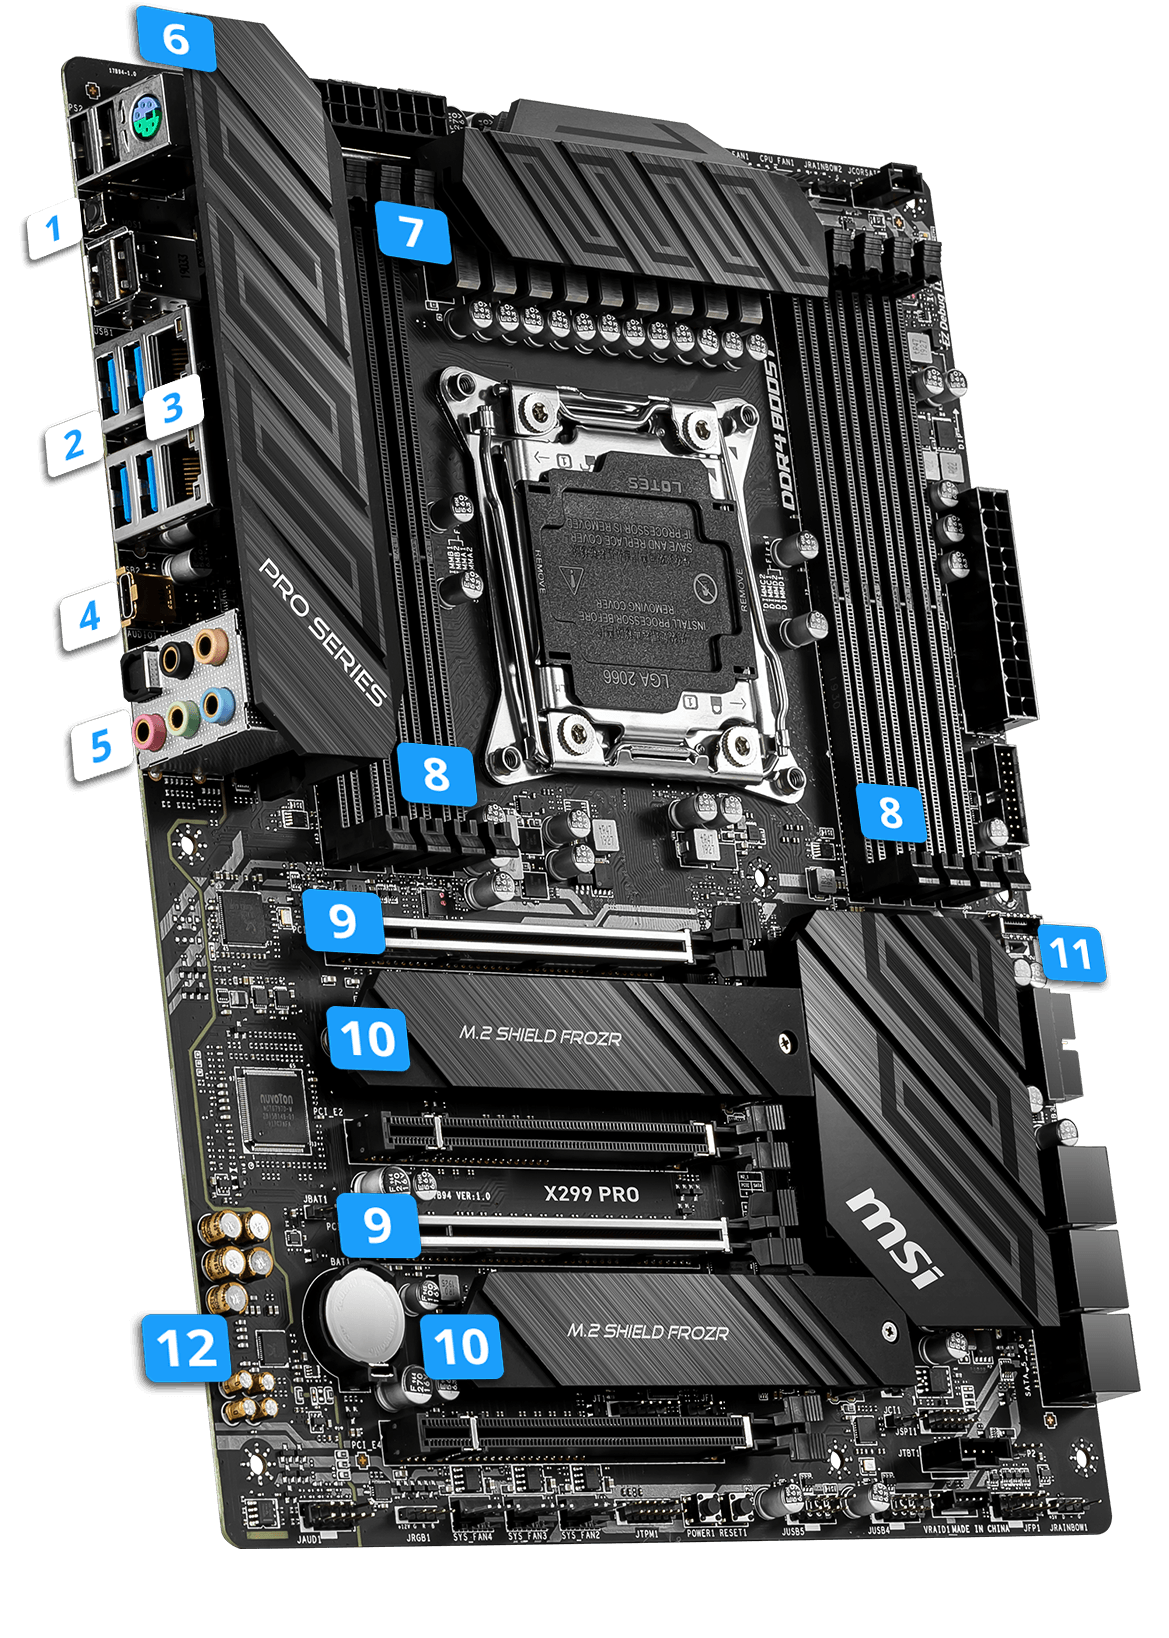 MSI X299 PRO overview